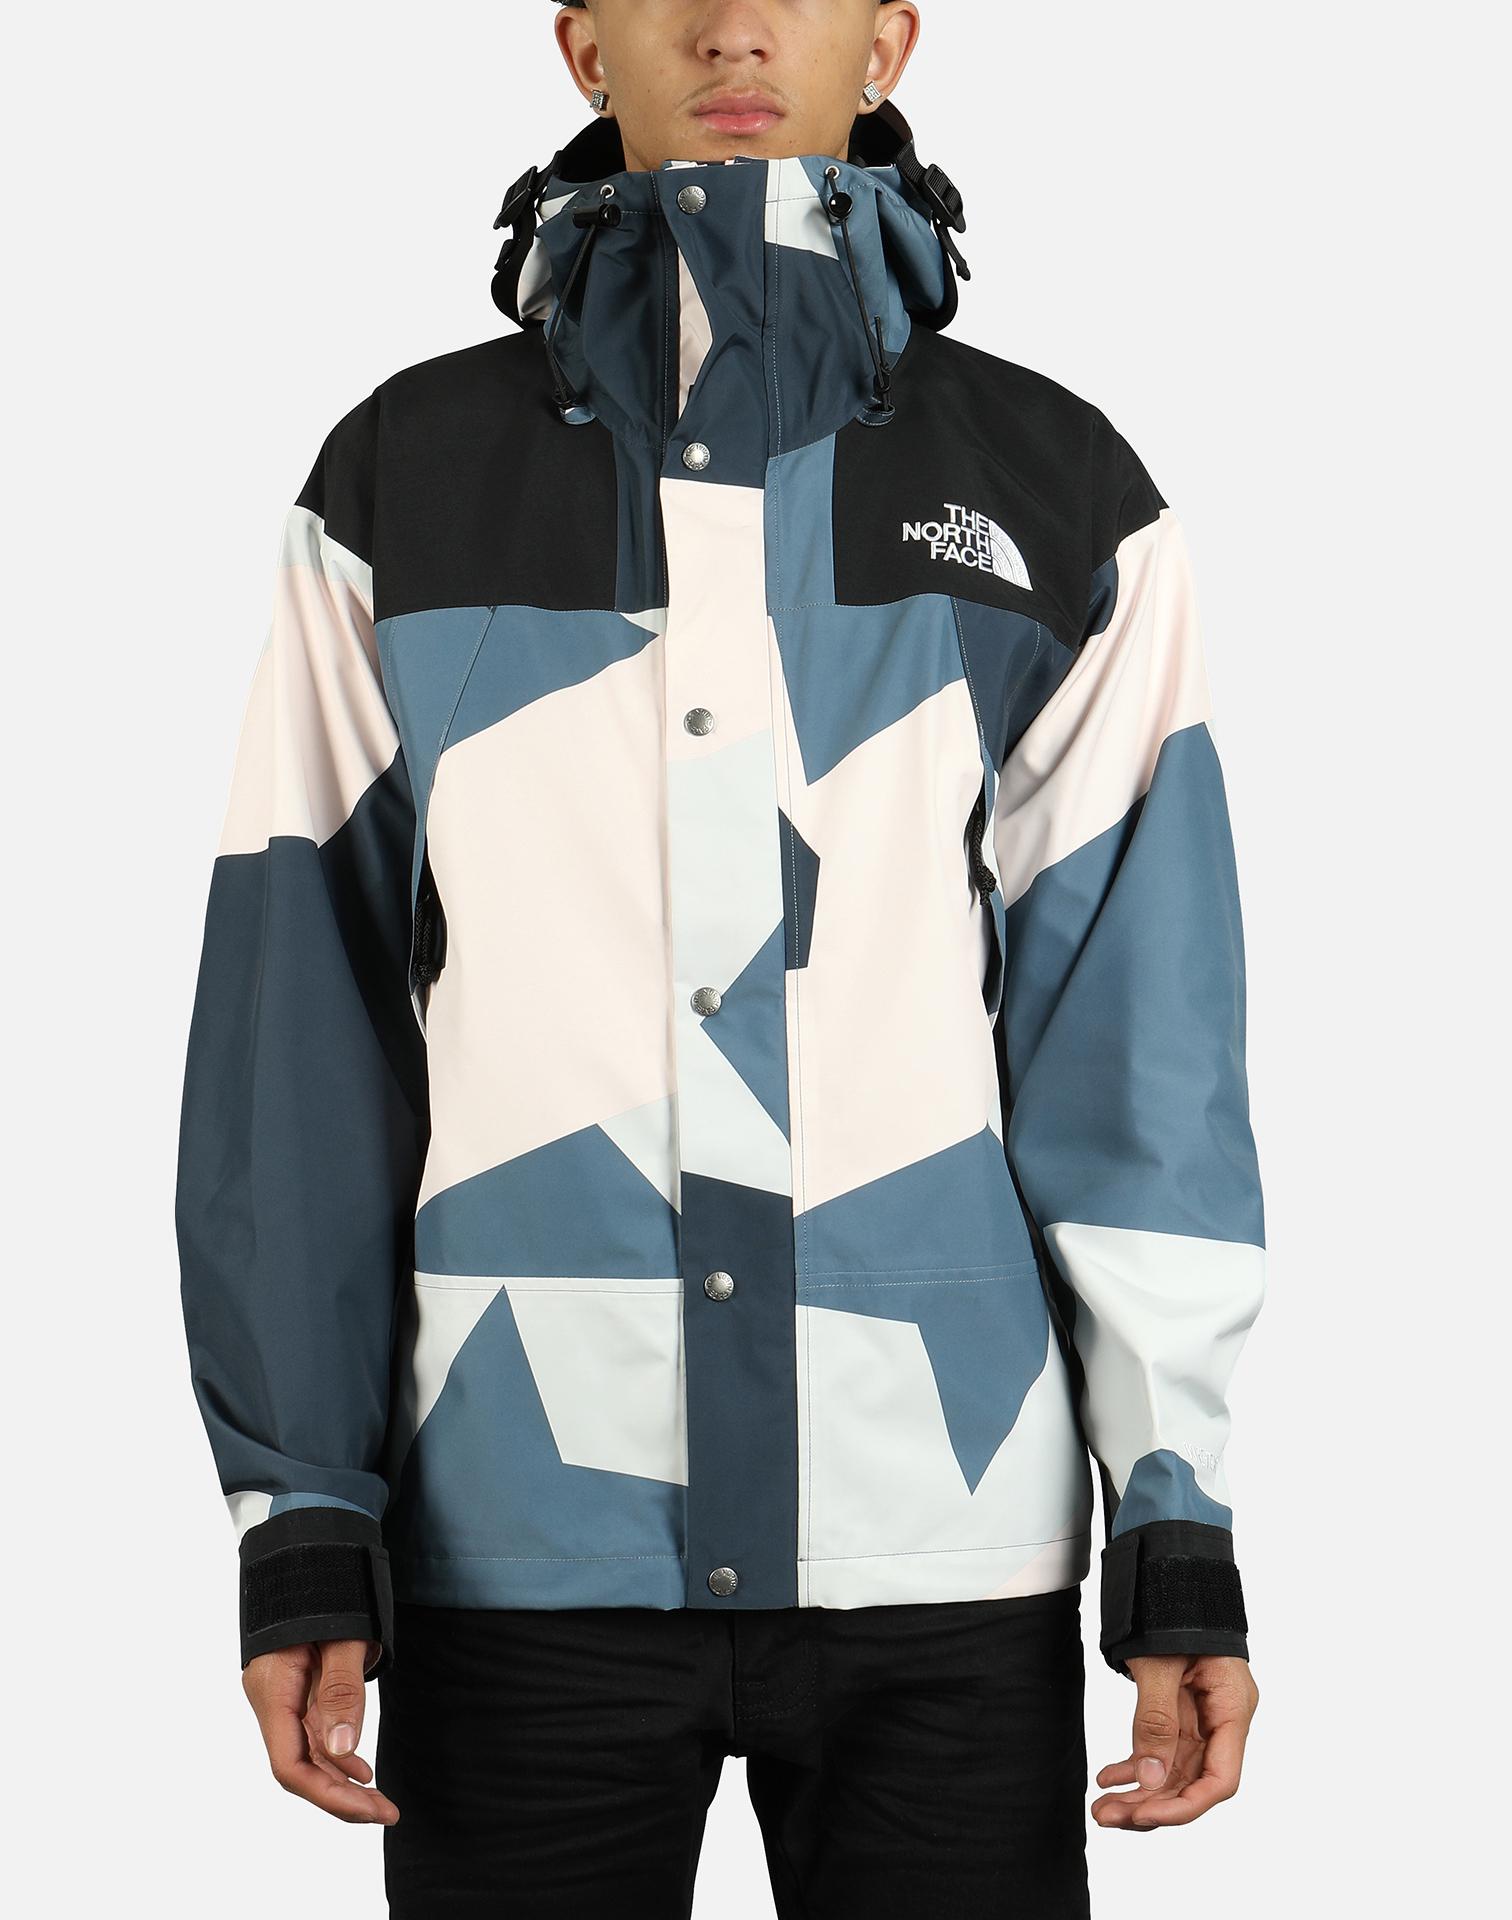 The North Face 1990 Mountain Jacket Gtx in Camouflage (Blue) - Lyst